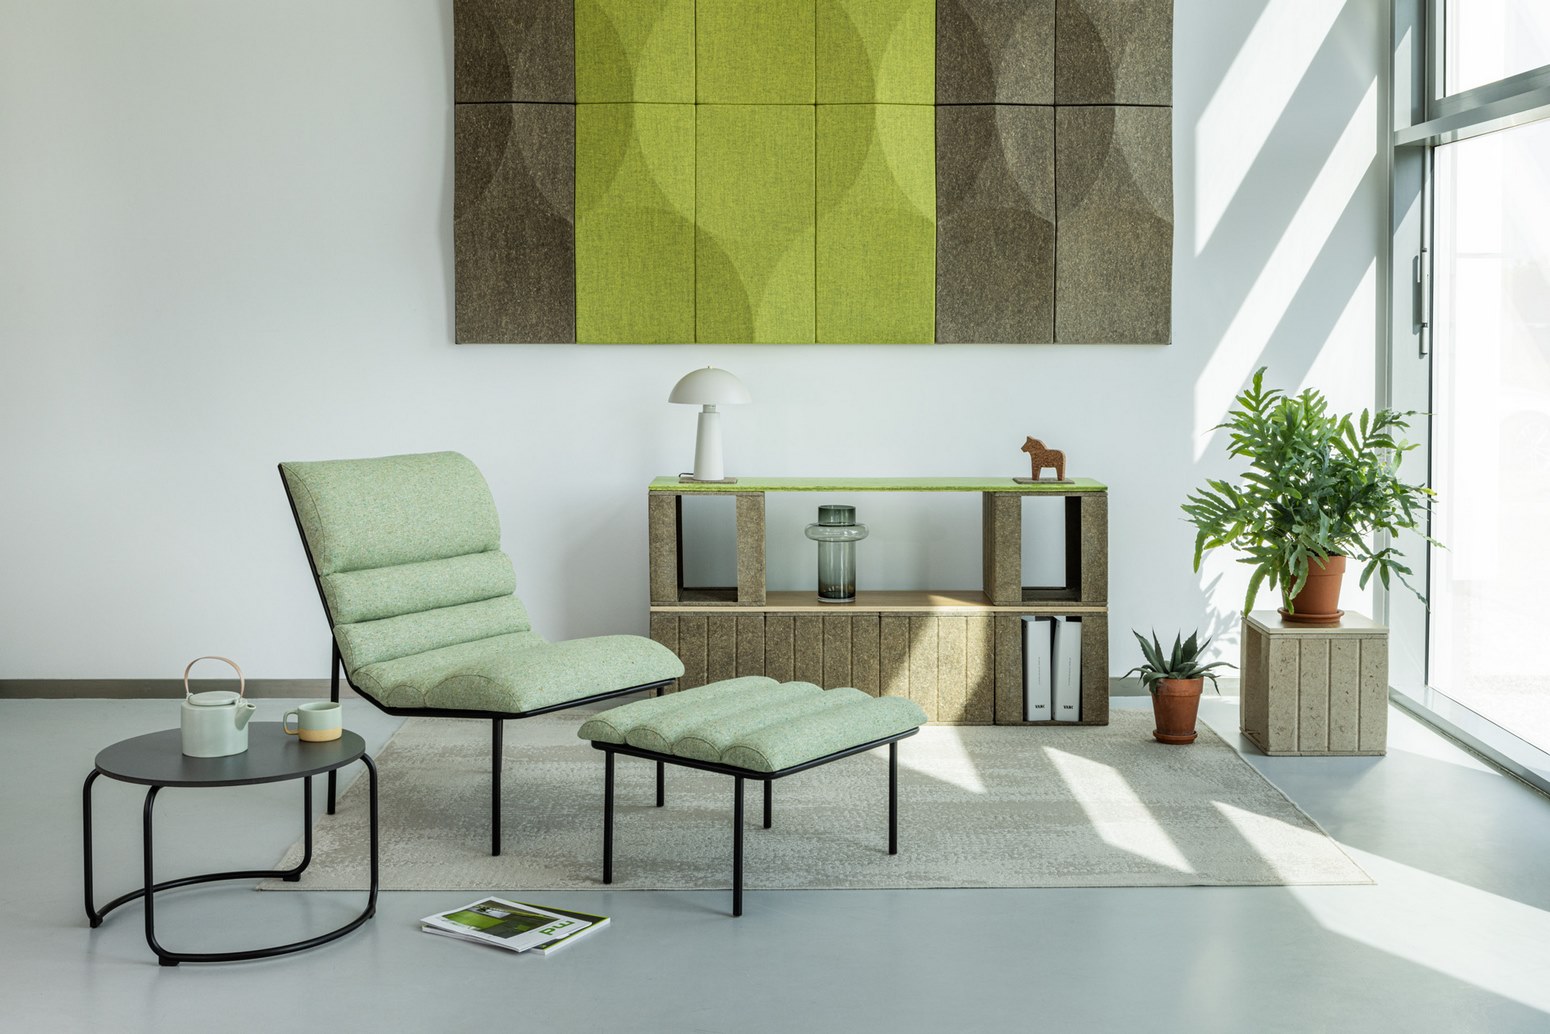 VANK_LONG armchair with a footrest, VANK_CUBE cabinet and VANK_ELLIPSE panels